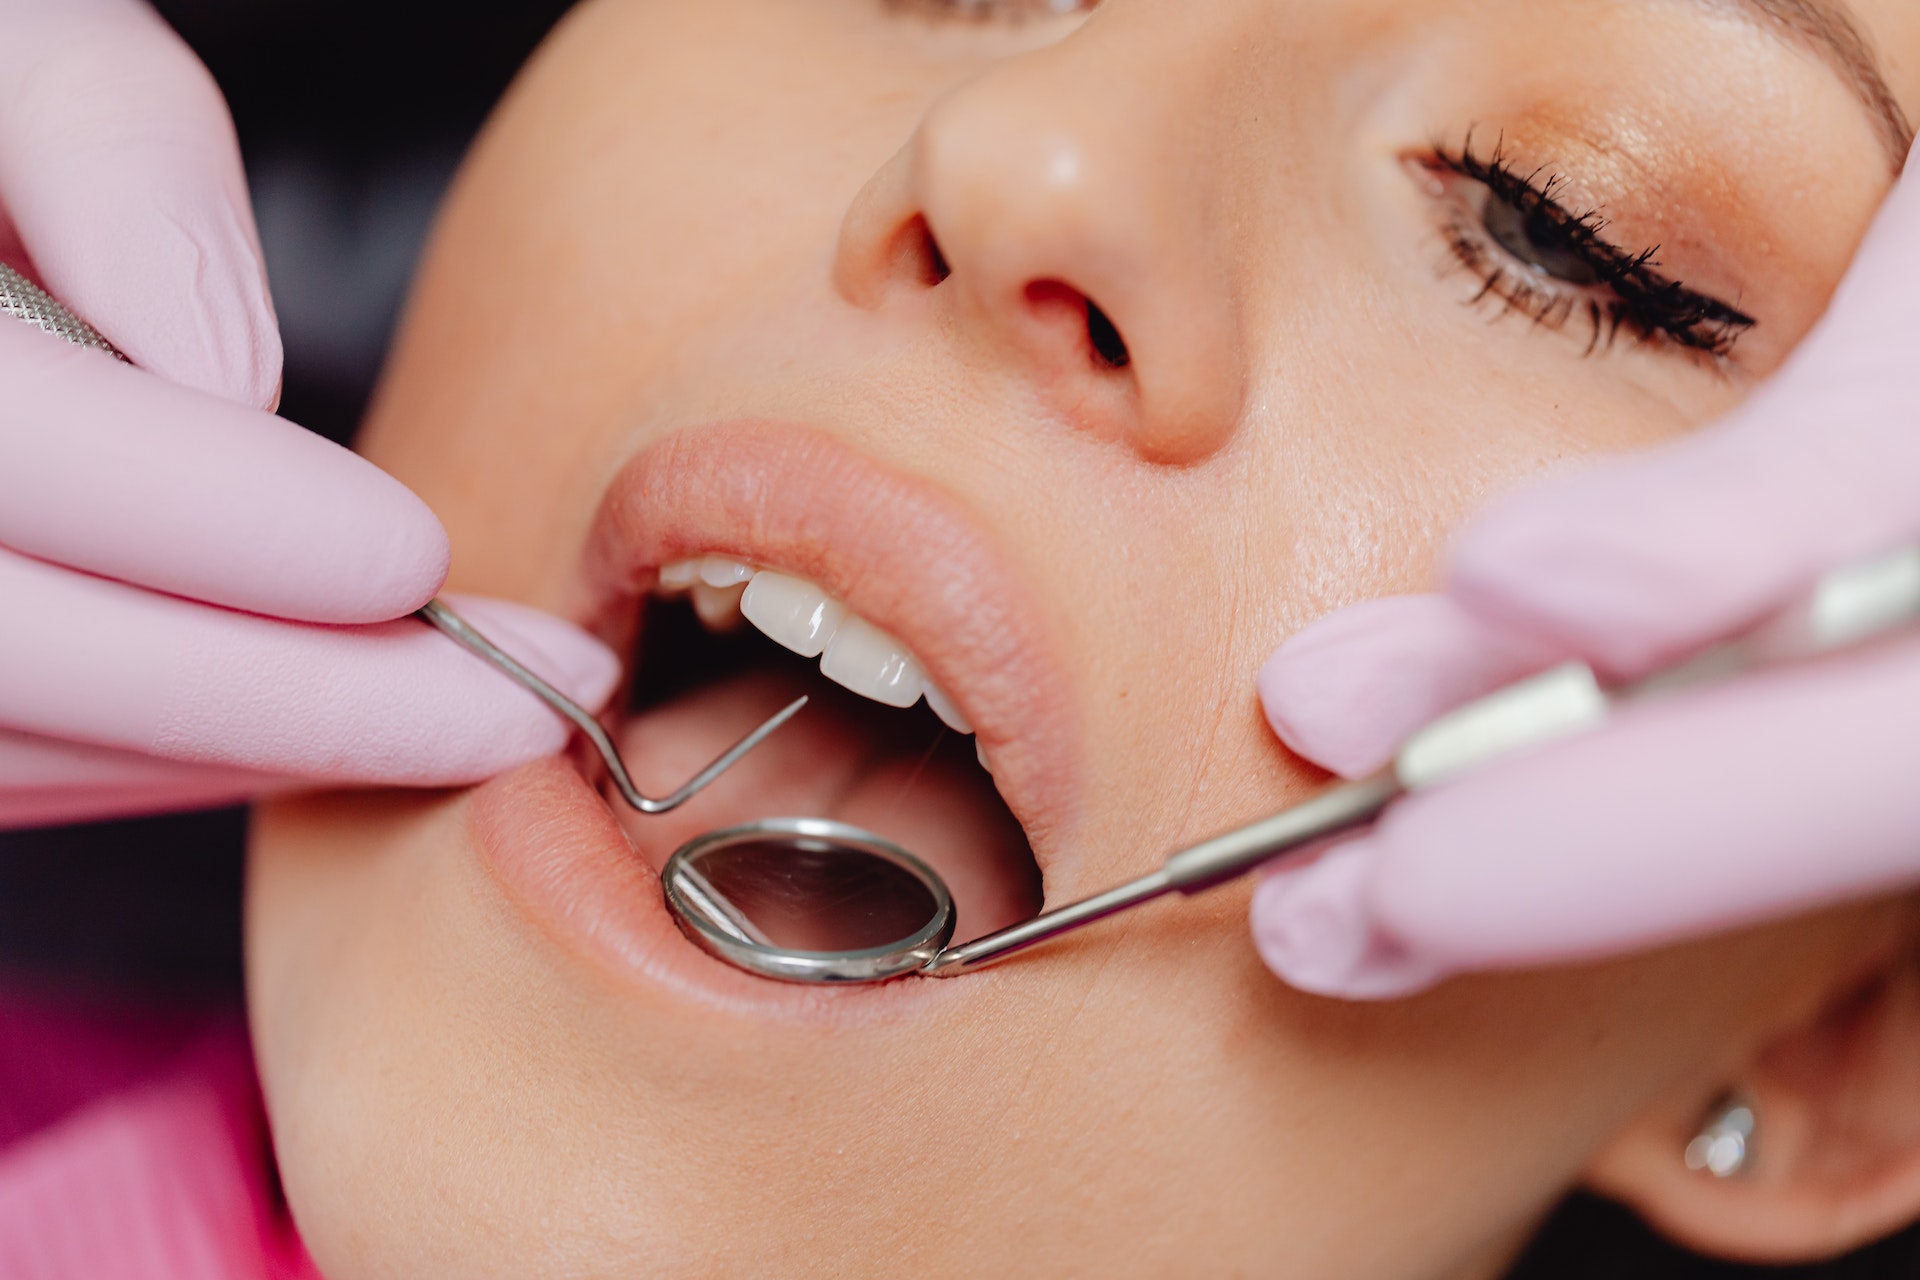 5 Common Reasons People Need To See a Prosthodontist